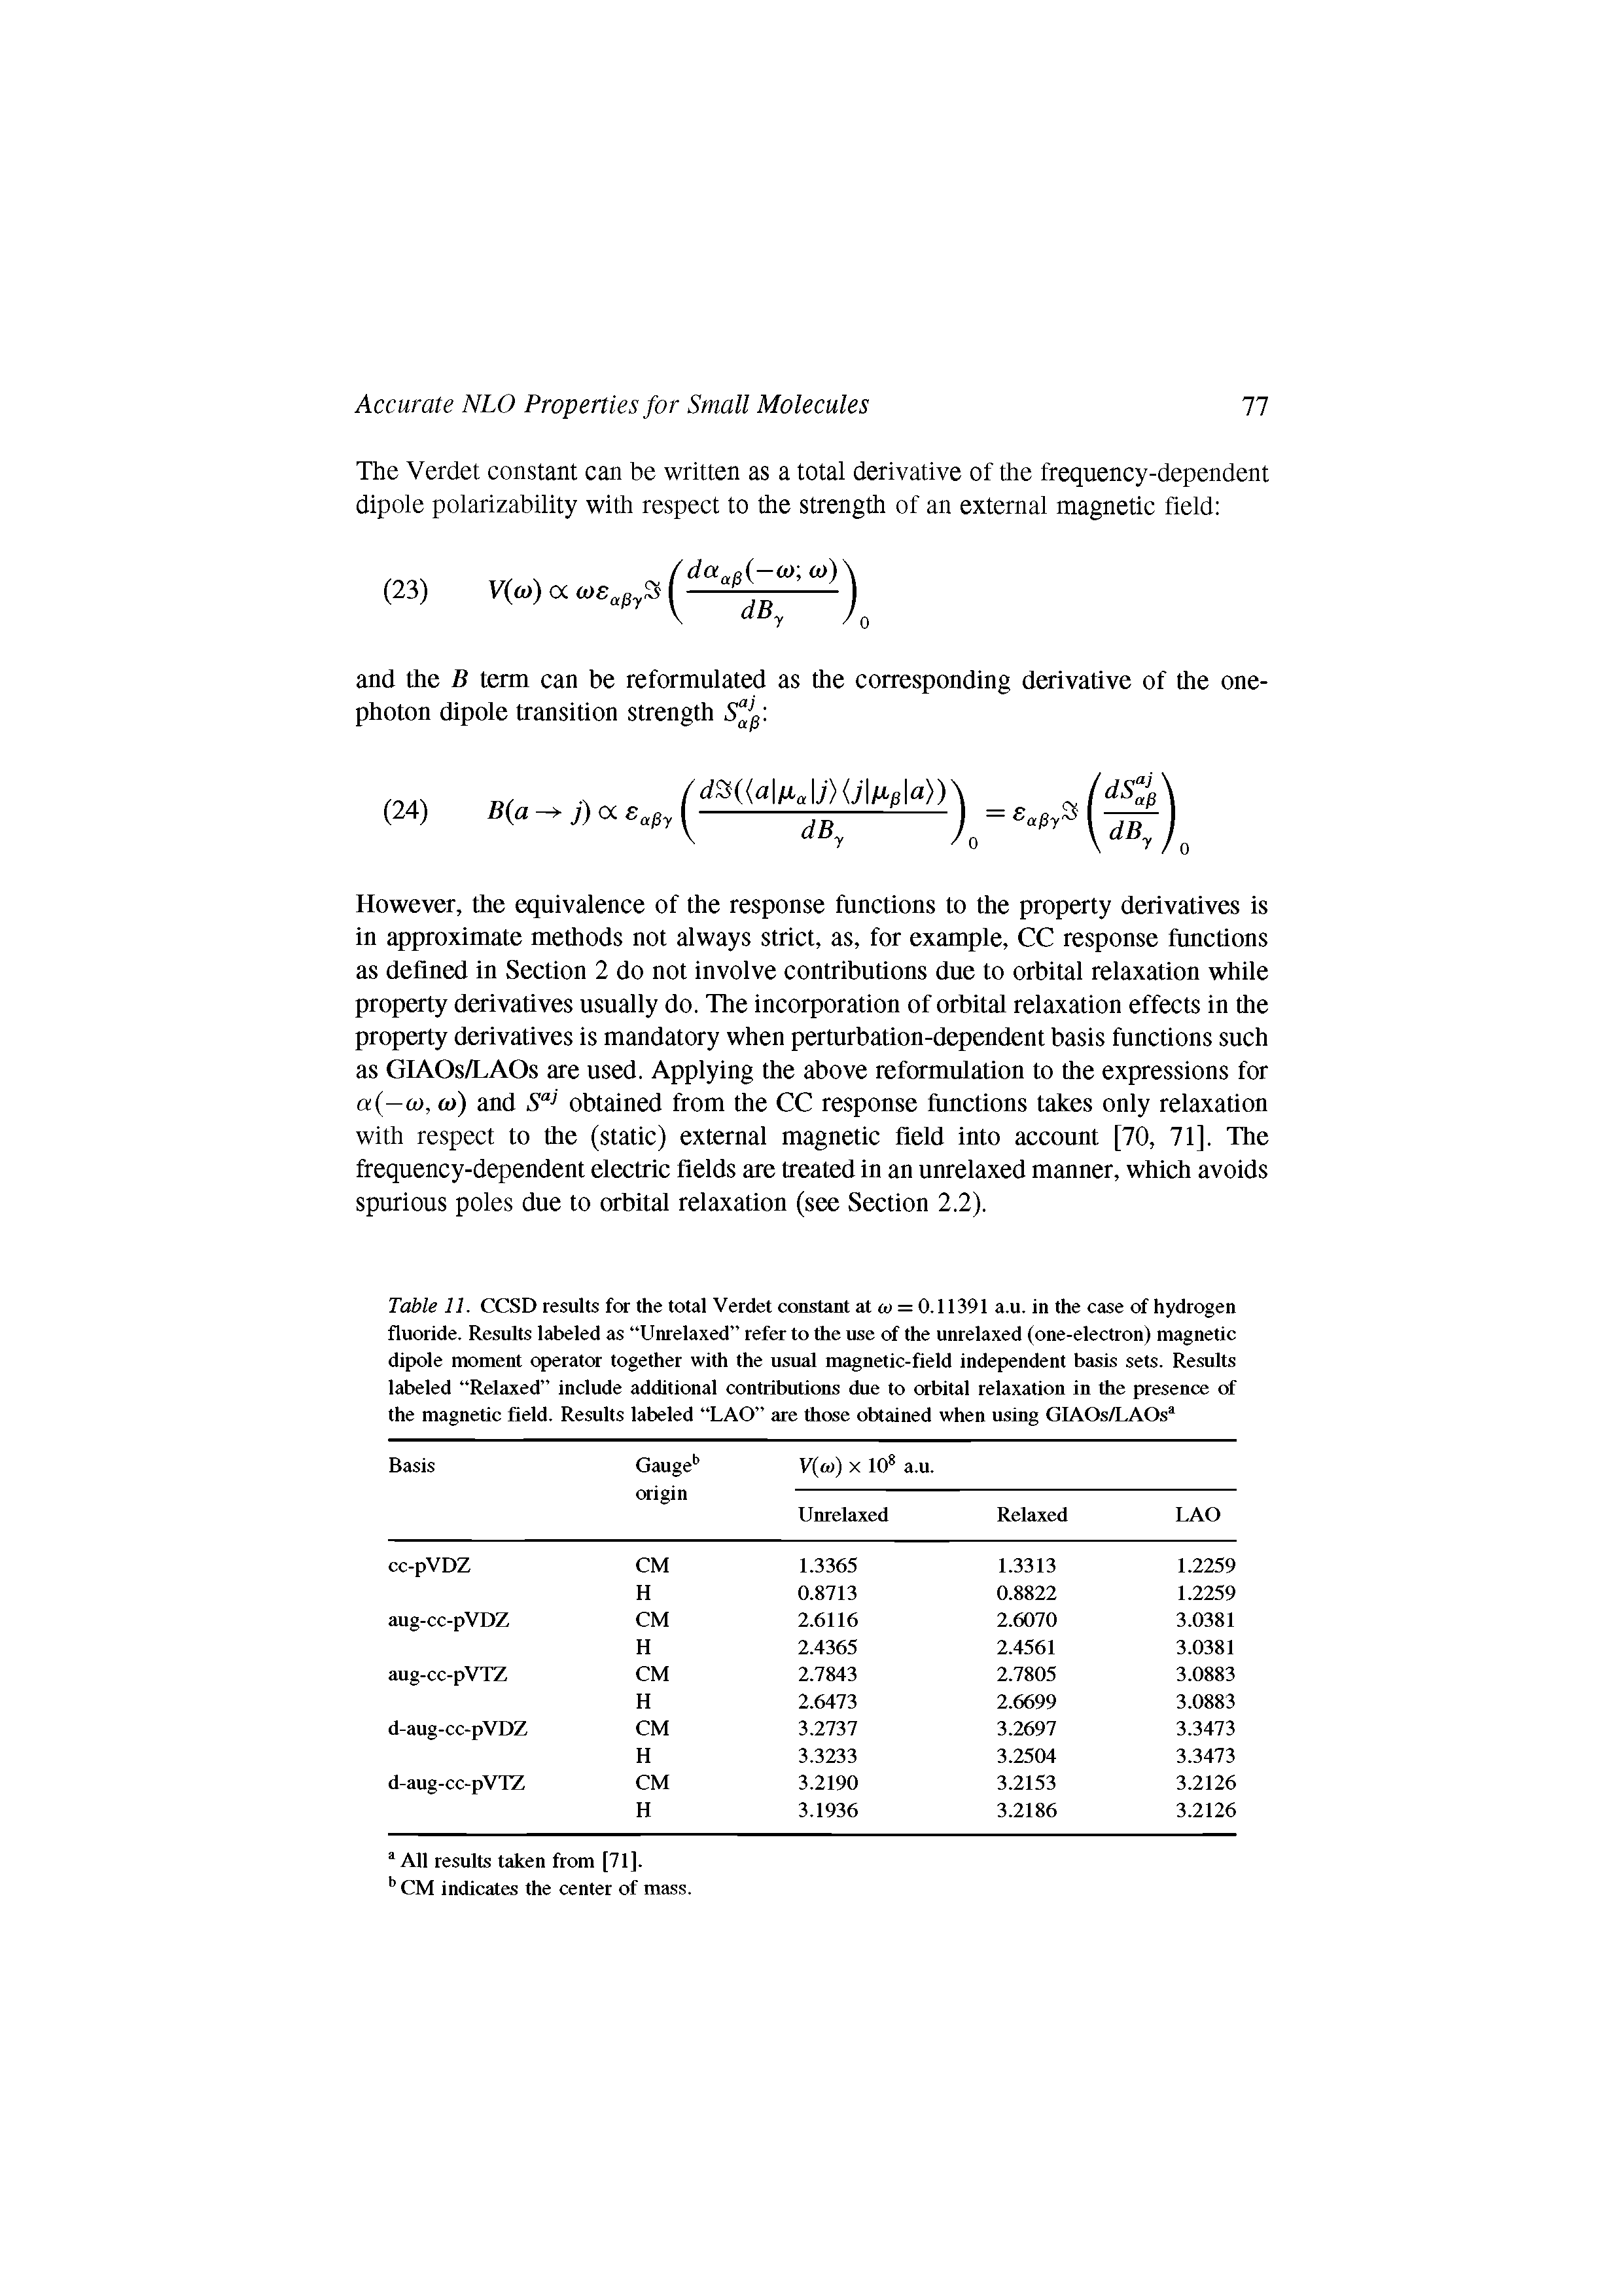 Table 11. CCSD results for the total Verdet constant at w = 0.11391 a.u. in the case of hydrogen fluoride. Results labeled as Unrelaxed refer to the use of the unrelaxed (one-electron) magnetic dipole moment operator together with the usual magnetic-field independent basis sets. Results labeled Relaxed include additional contributions due to orbital relaxation in the presence of the magnetic field. Results labeled LAO are those obtained when using GIAOs/LAOs ...